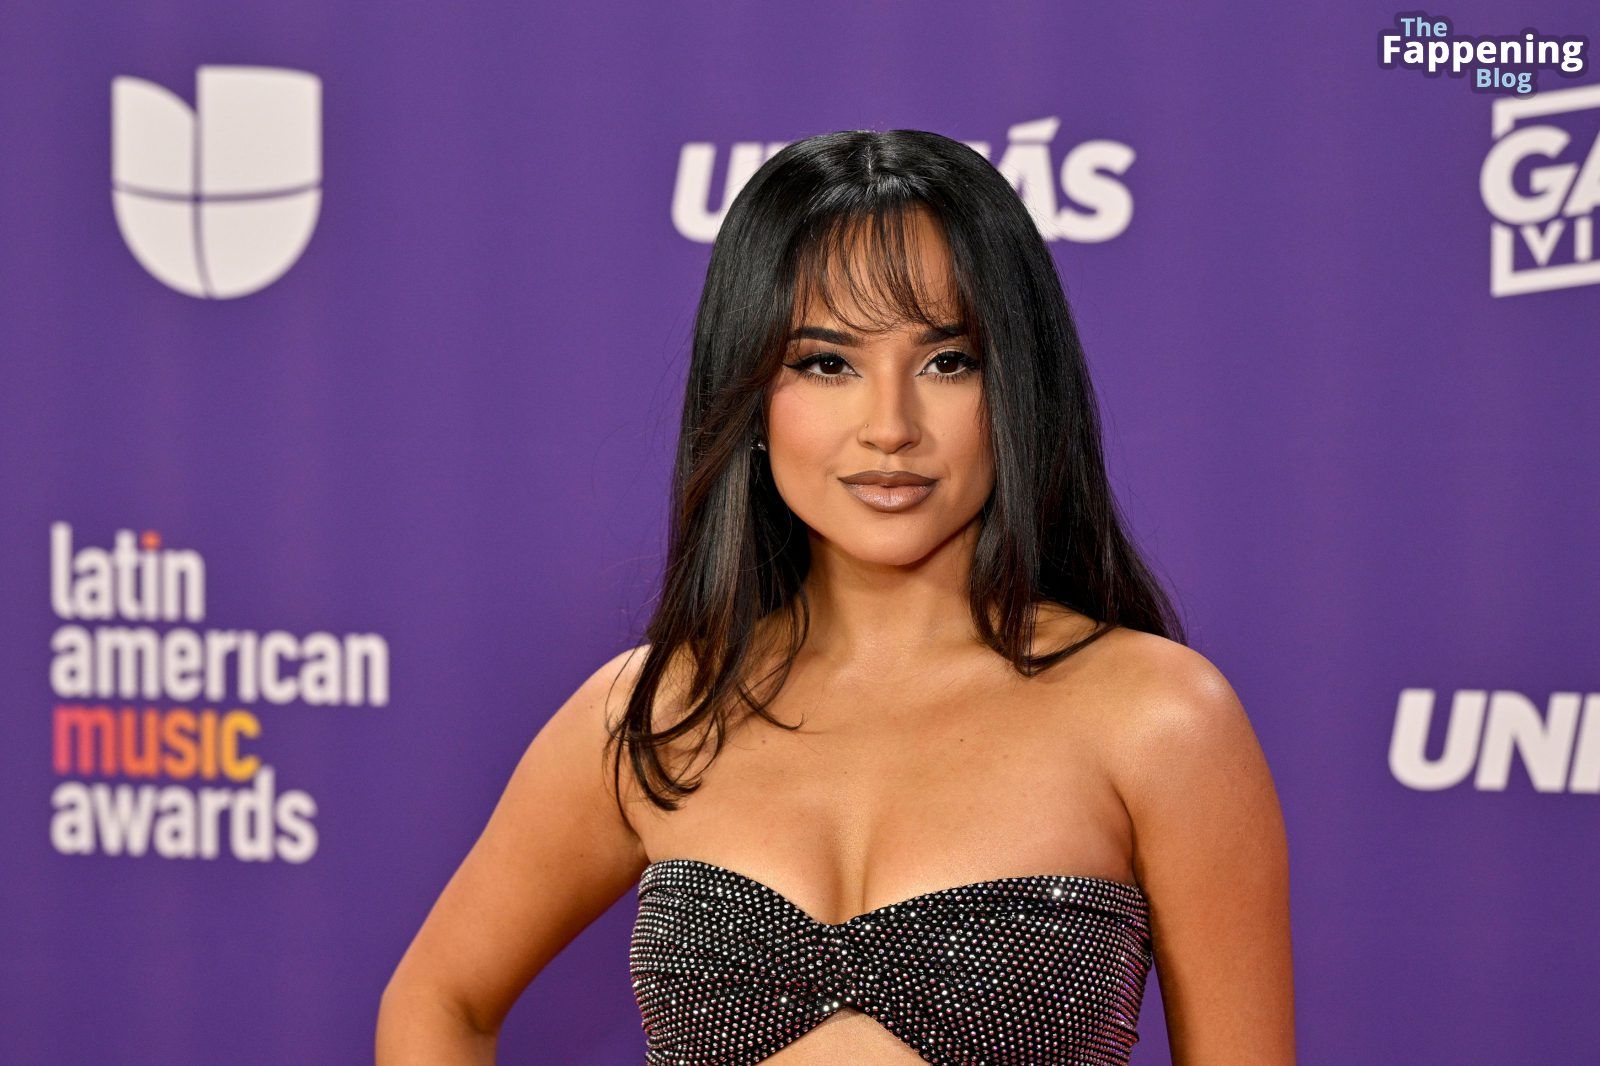 Becky G Displays Her Assets at the Latin American Music Awards in Vegas (22 Photos)